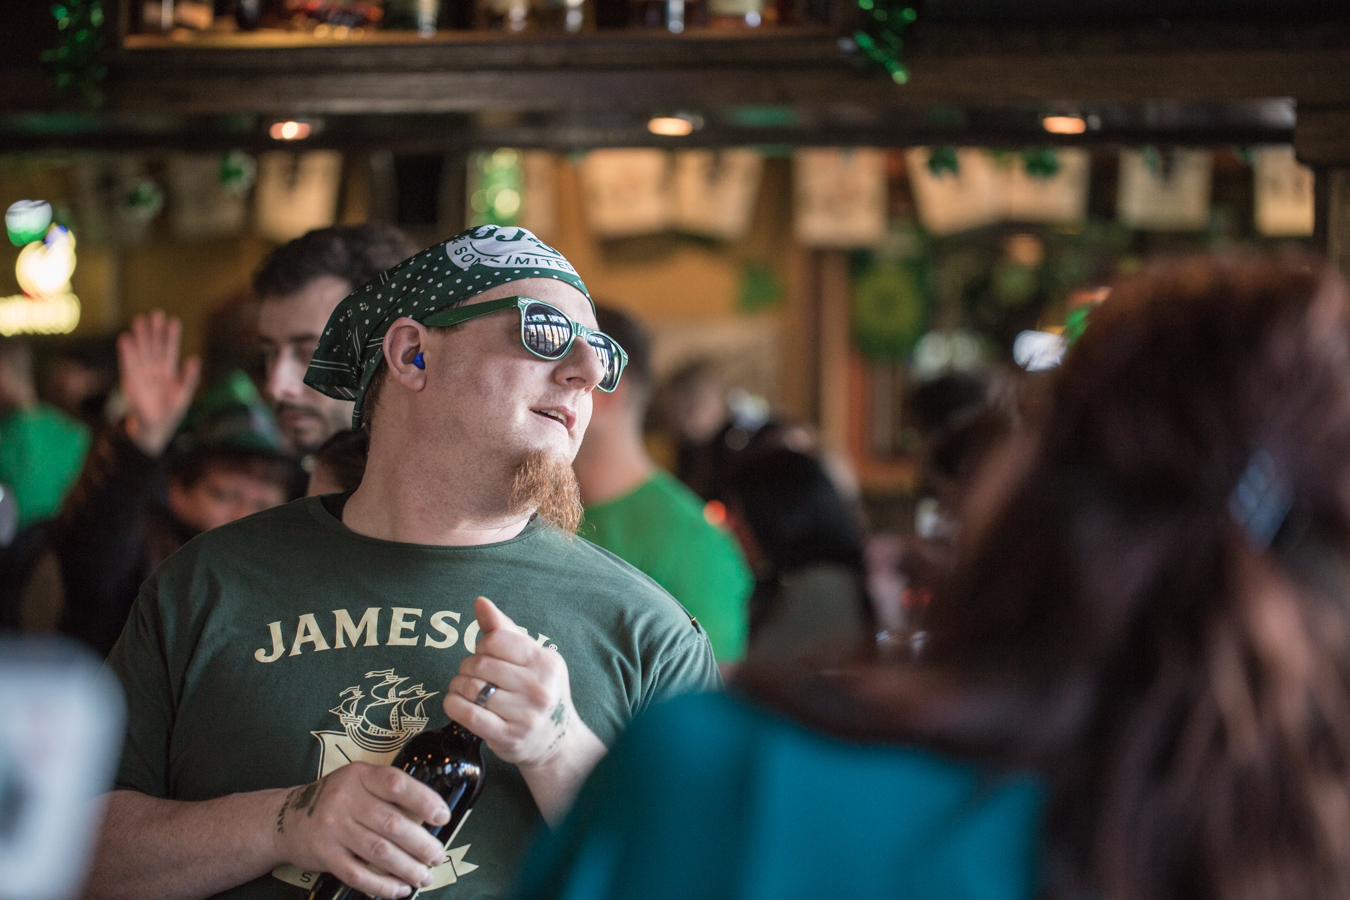 The Staff at this pub where COMPLETELY slammed and held things together like a bunch of champs - St. Patricks Day 2019 - Shamrock City Pub - water street